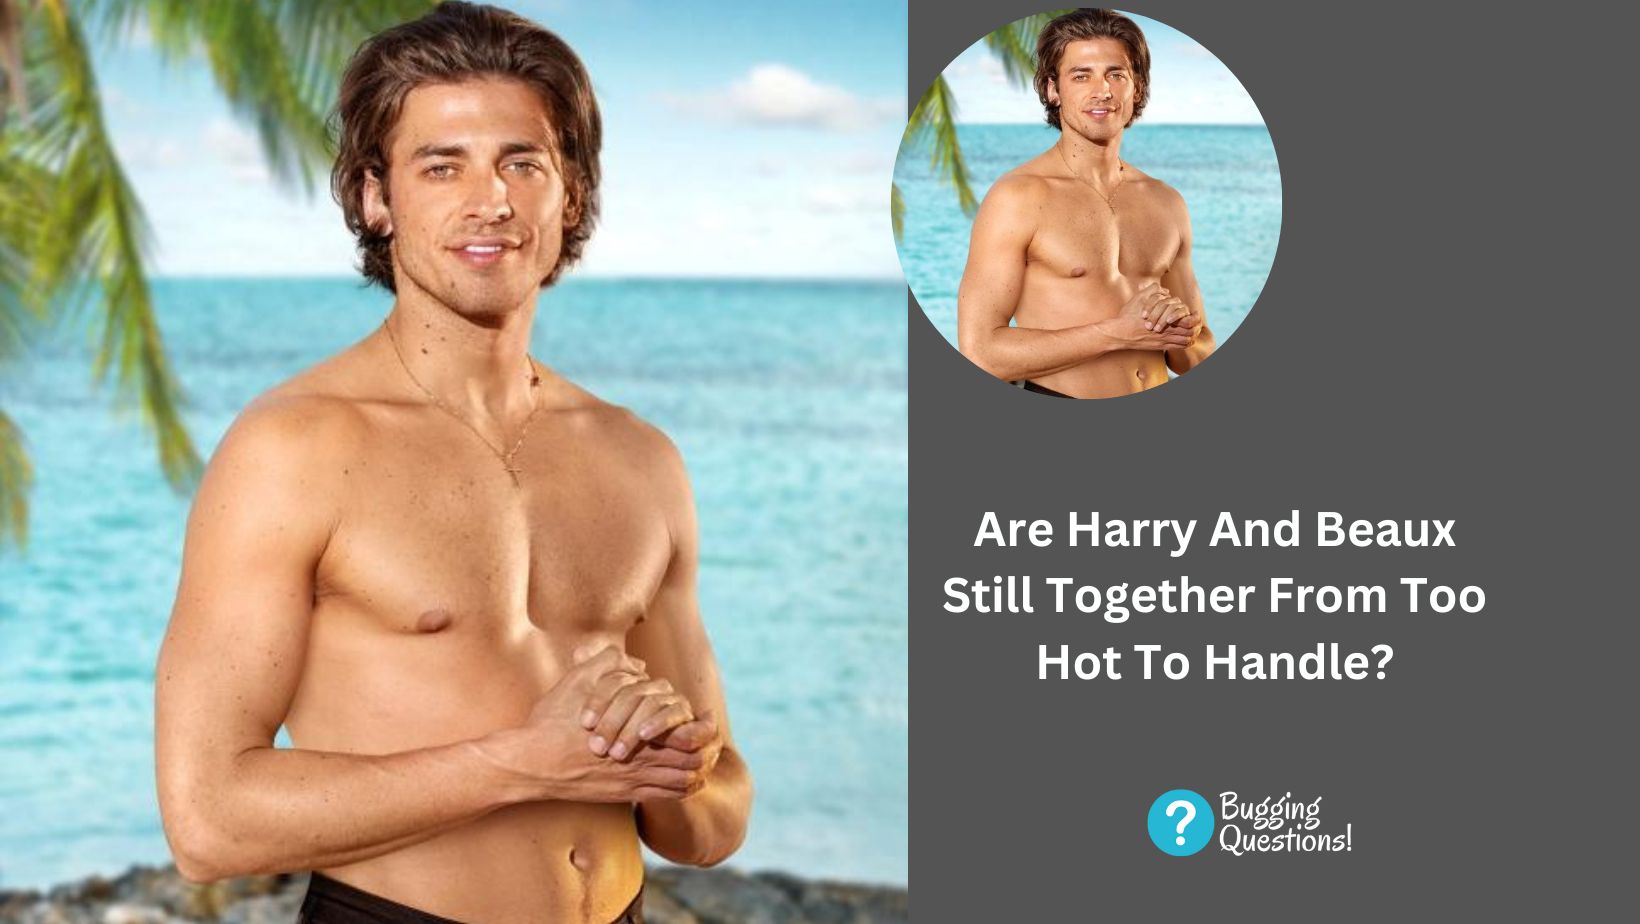 Are Harry And Beaux Still Together From Too Hot To Handle?